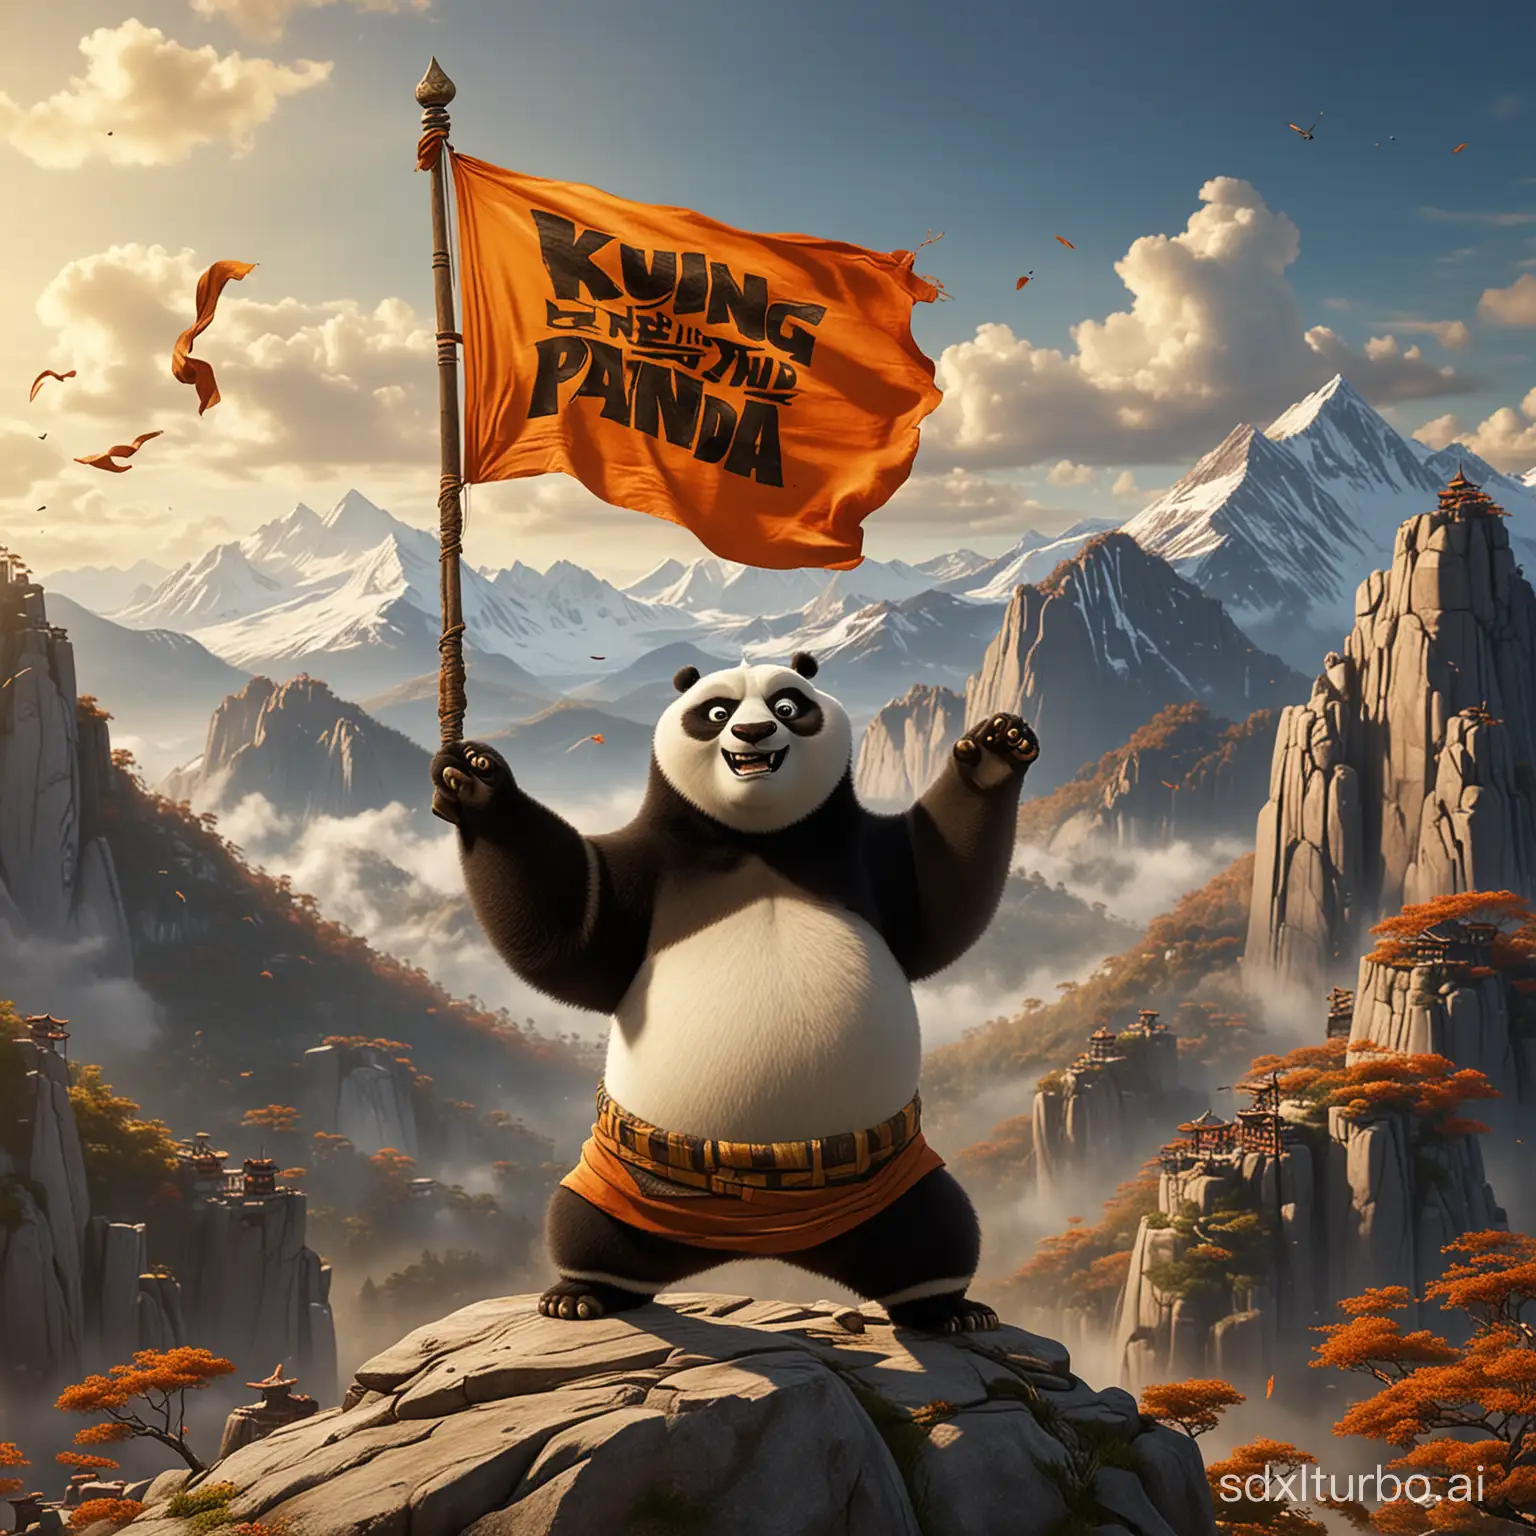 Kung Fu Panda defeated the tiger, stood on the mountaintop draped in a banner, and raised its arms to display its victory.